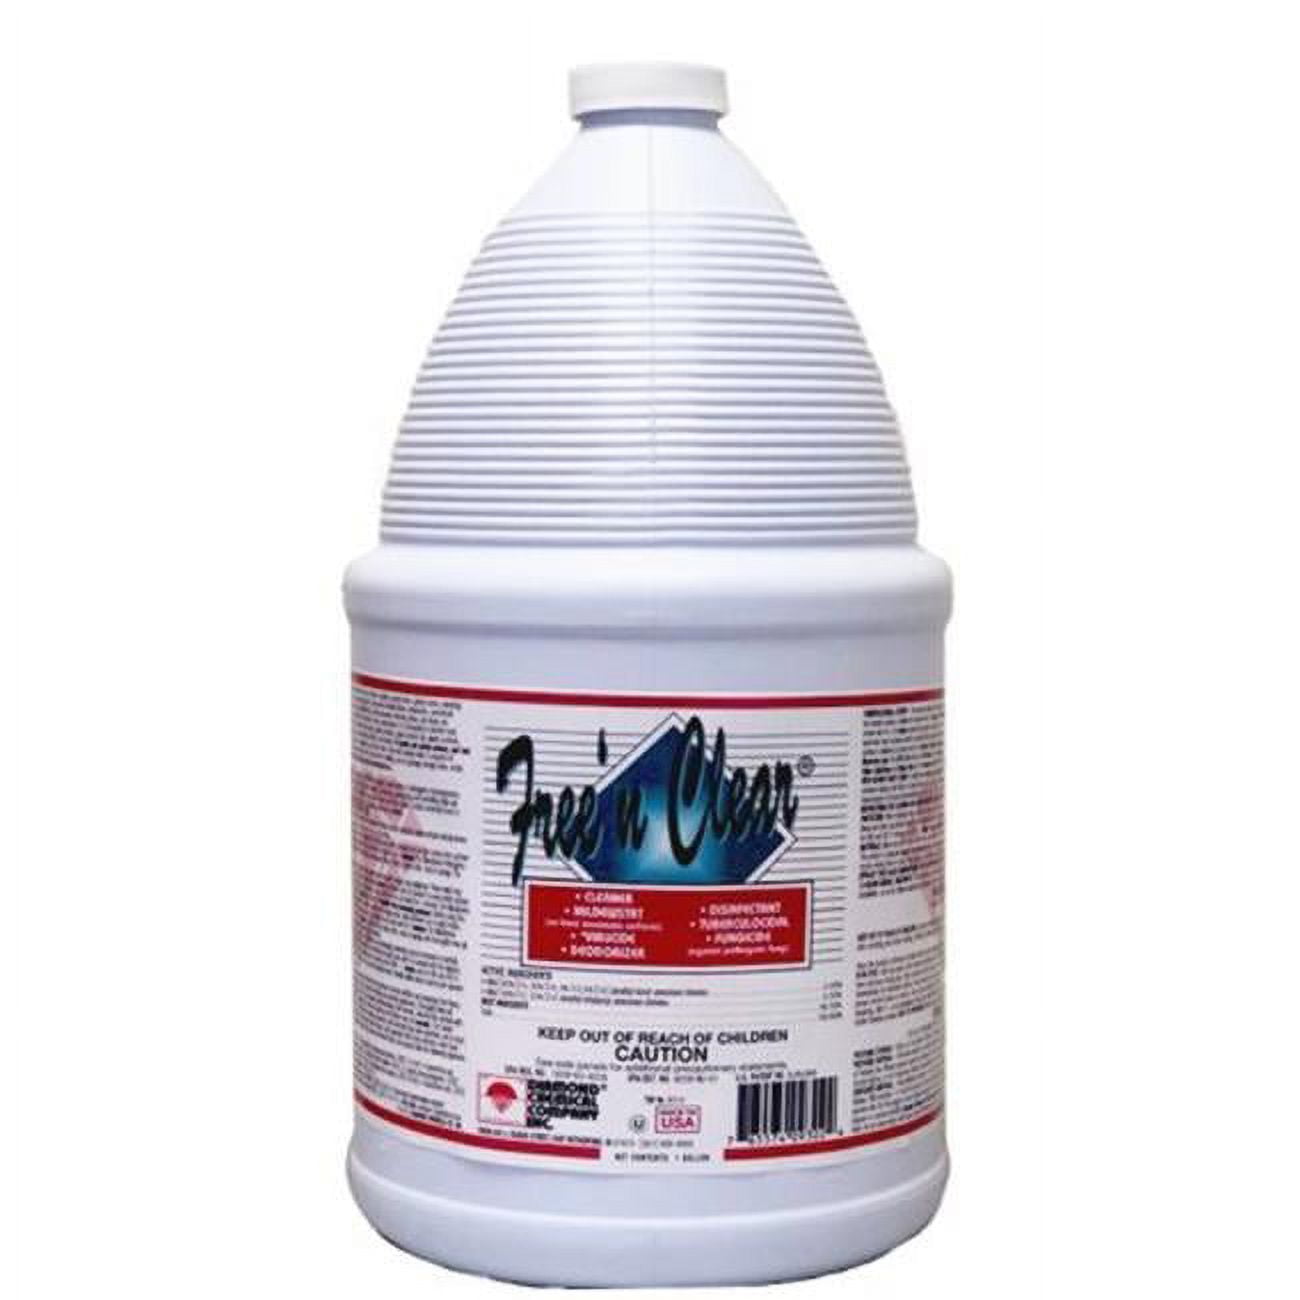 Picture of Diamond Chemical DIA9302EACH 1 gal Free N Clear Disinfectant Cleaner - Coronavirus Effective Chemical